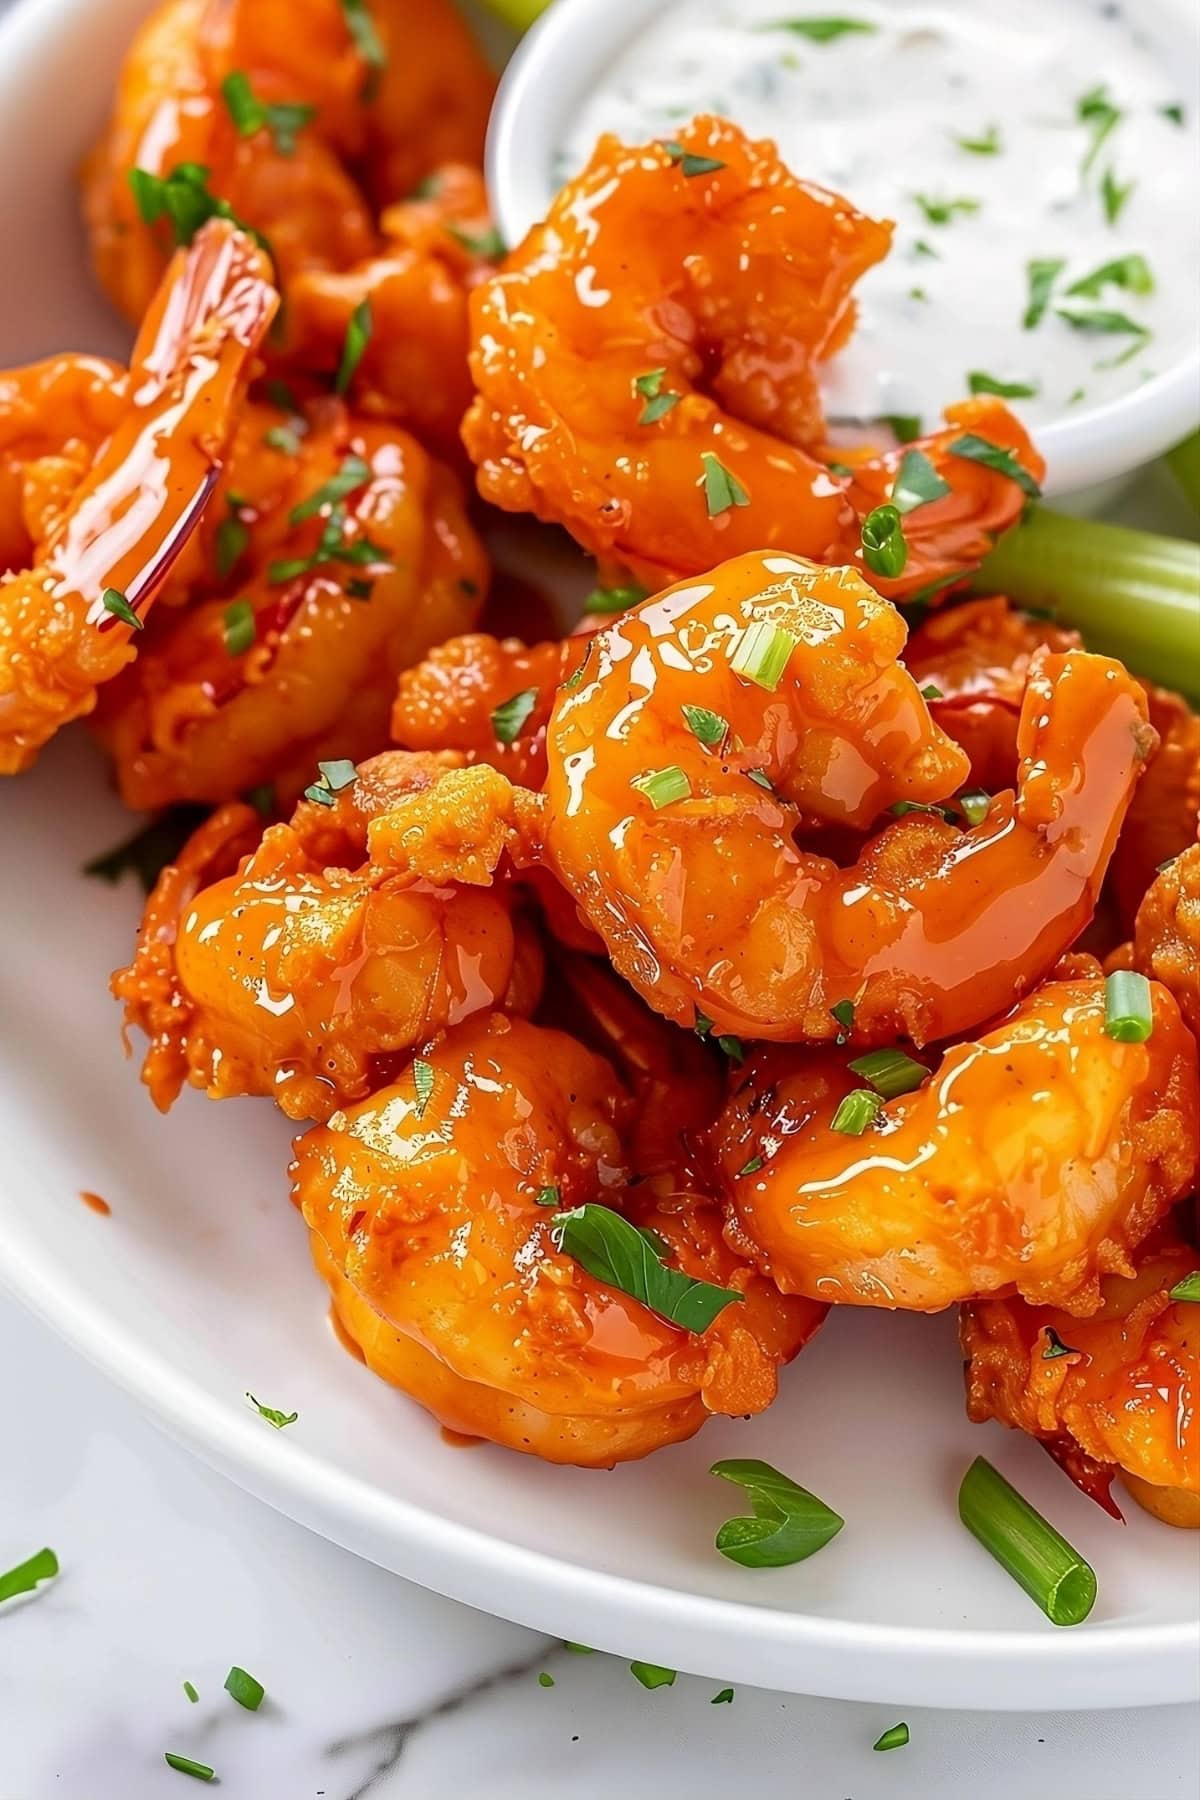 Buffalo shrimp in a white plate with celery sticks and ranch dip.